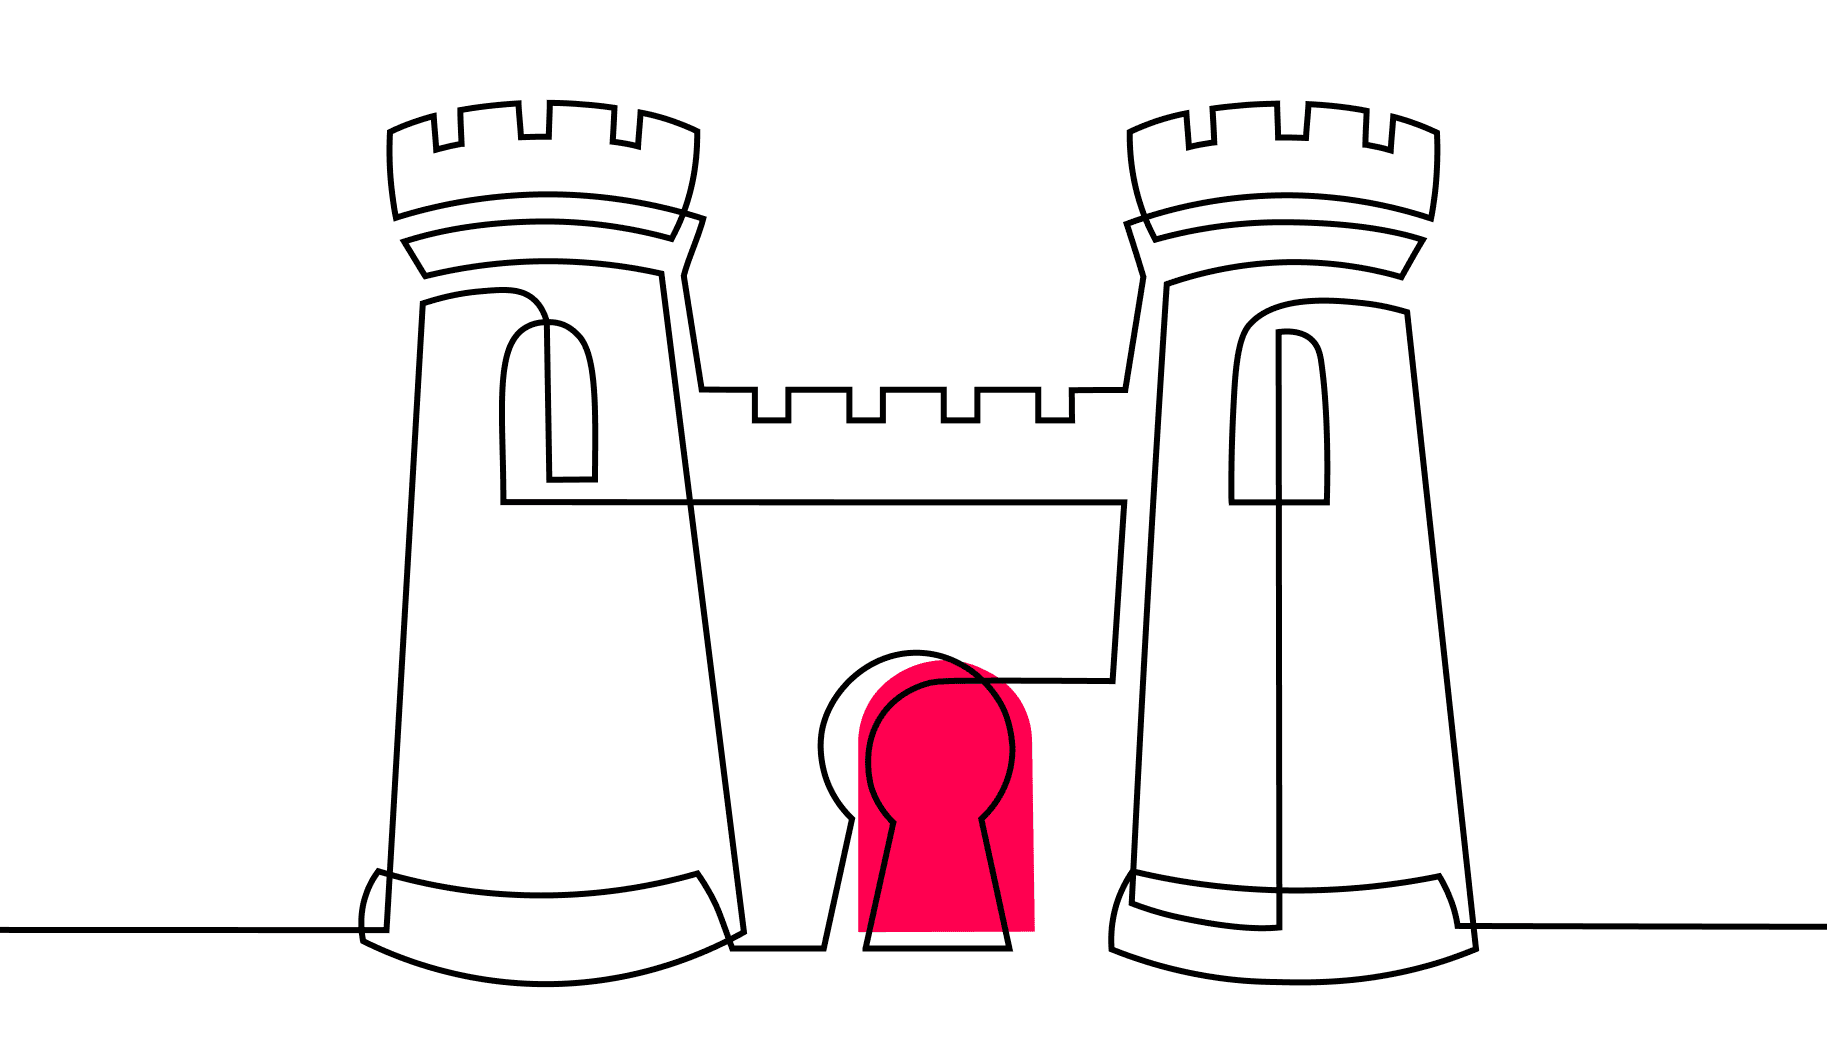 An illustration of a castle with a keyhole using a single contiguous line